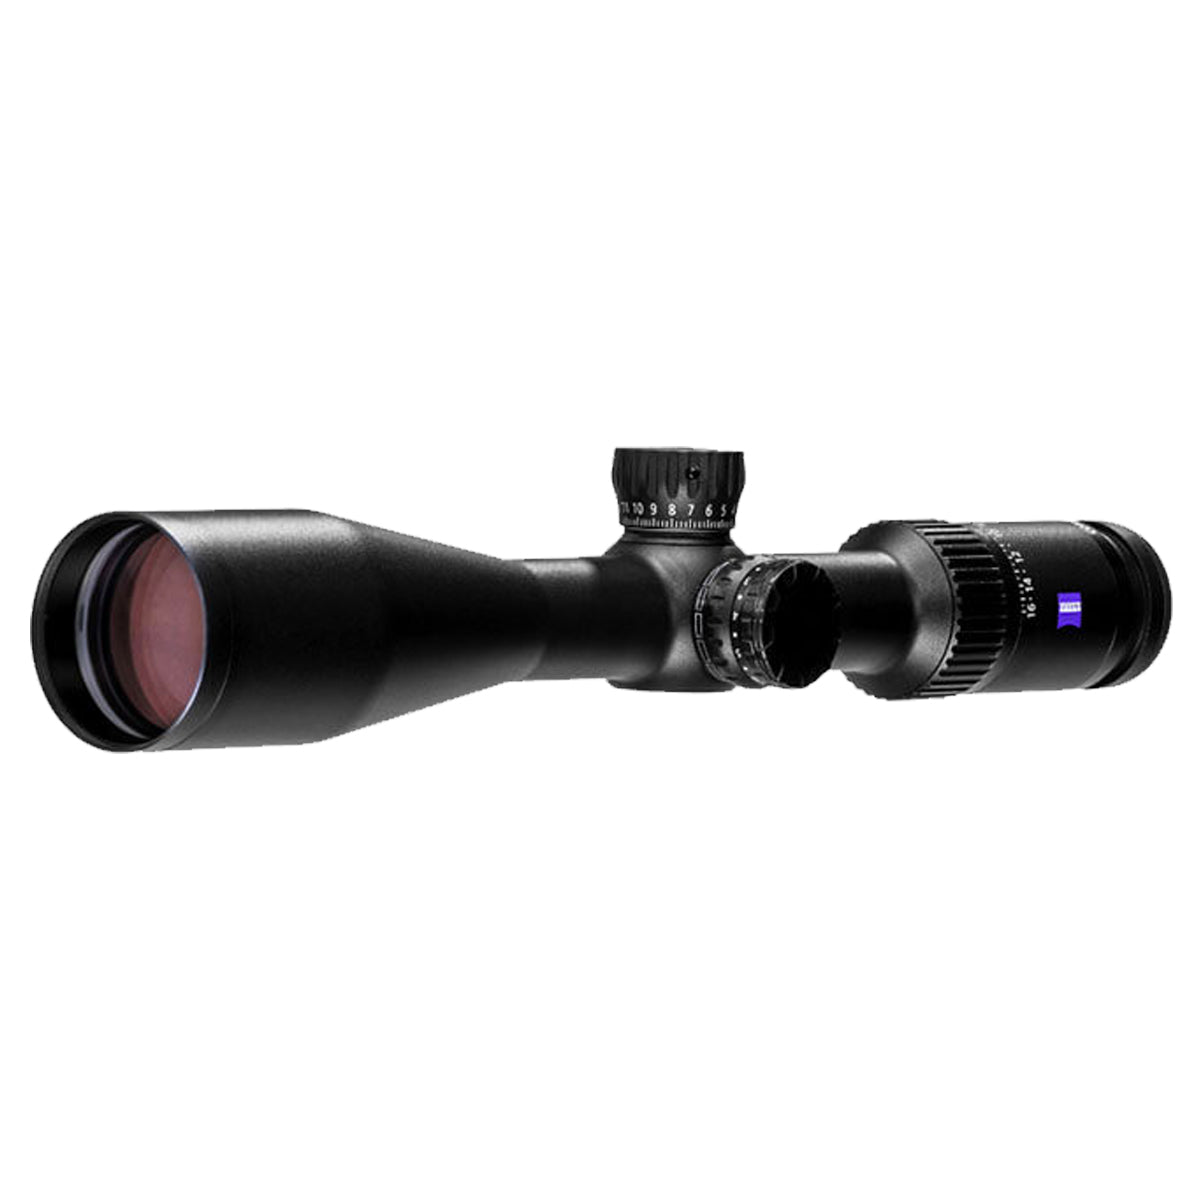 Zeiss Conquest V4 4-16x50 ZBi Illuminated #68 Reticle w/ Locking Turret